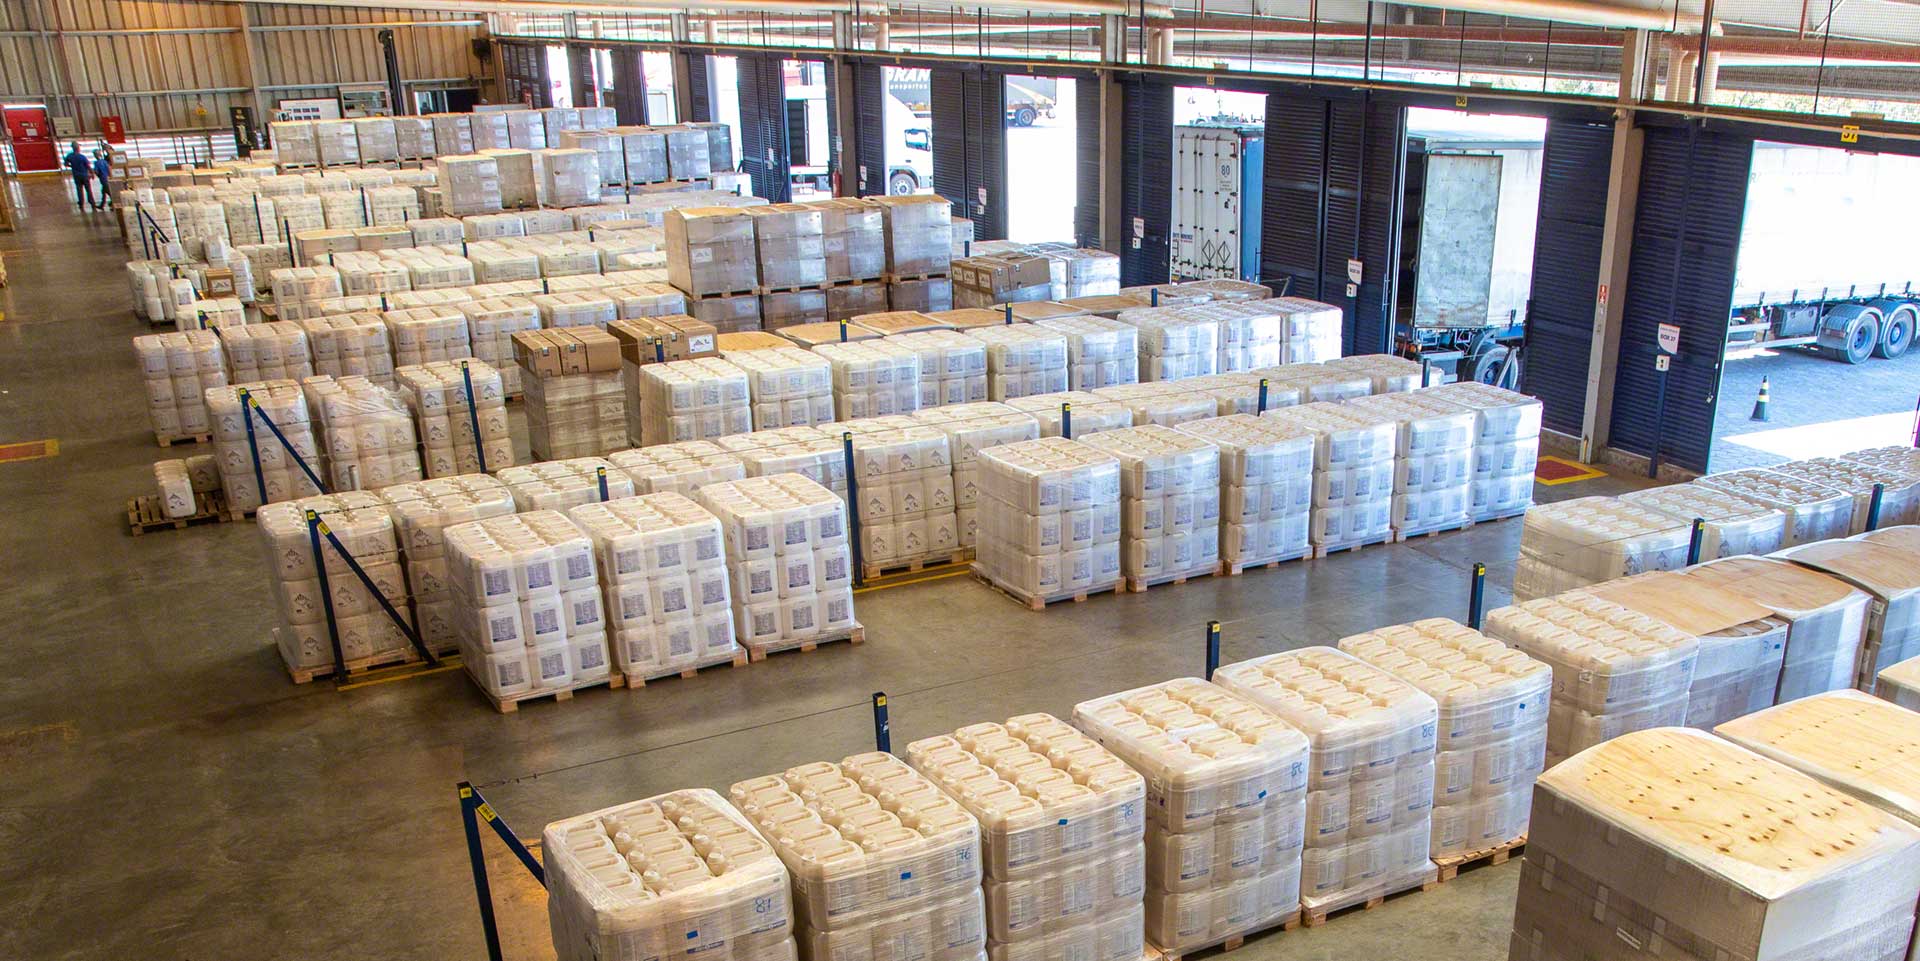 Optimal stock is the essential level of goods required to ensure maximum warehouse efficiency